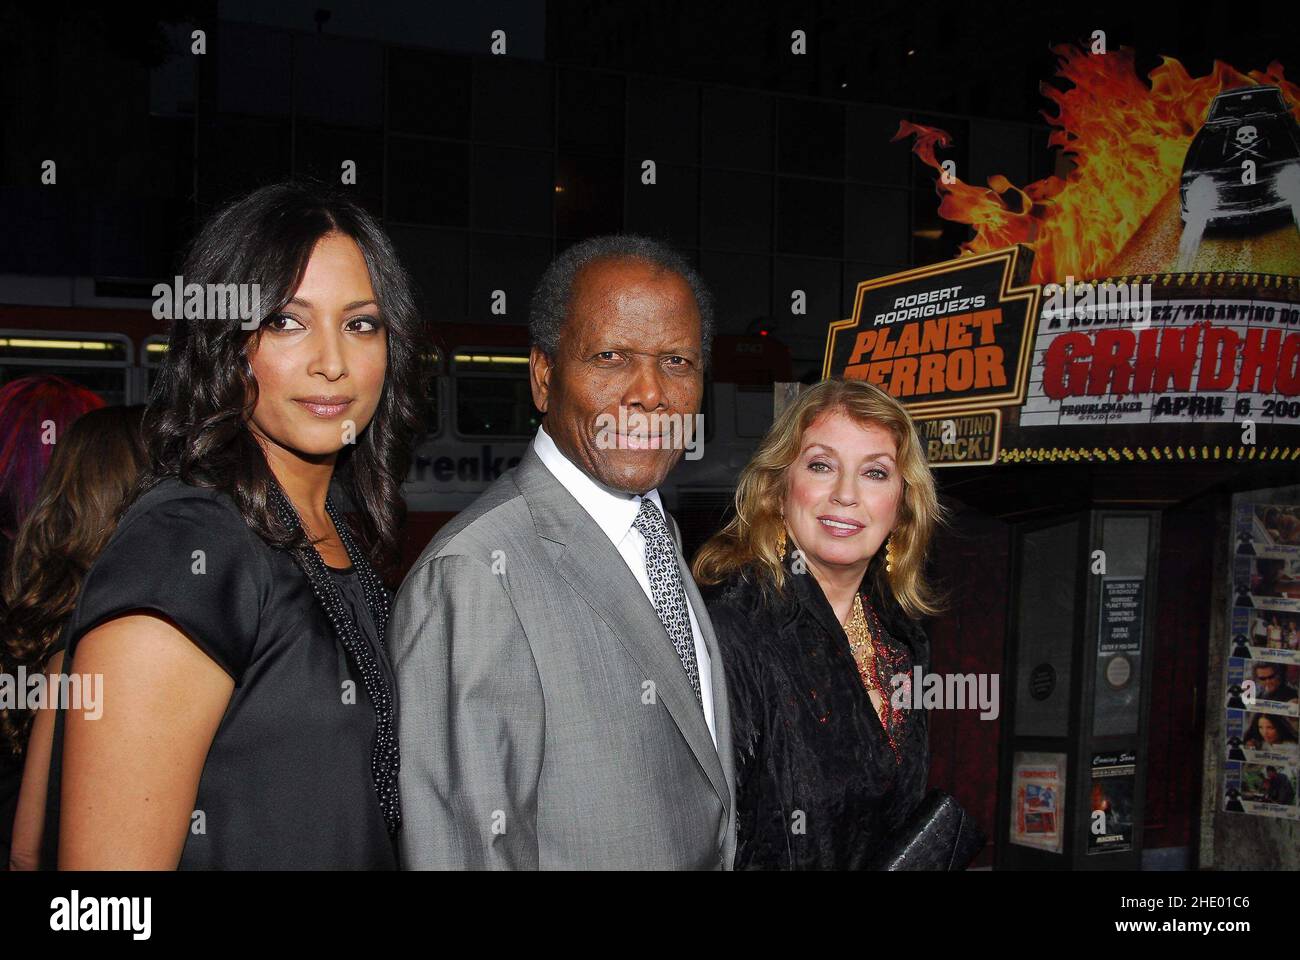 Anika Poitier with Sidney Poitier and Joanna Poitier. 26 March 2007 - Los Angeles, California. 'Grindhouse' Los Angeles Premiere at the Orpheum Theater. Photo Credit: Giulio Marcocchi/Sipa Press. (') Copyright 2007 by Giulio Marcocchi./grind gm.216/0703270958 Stock Photo